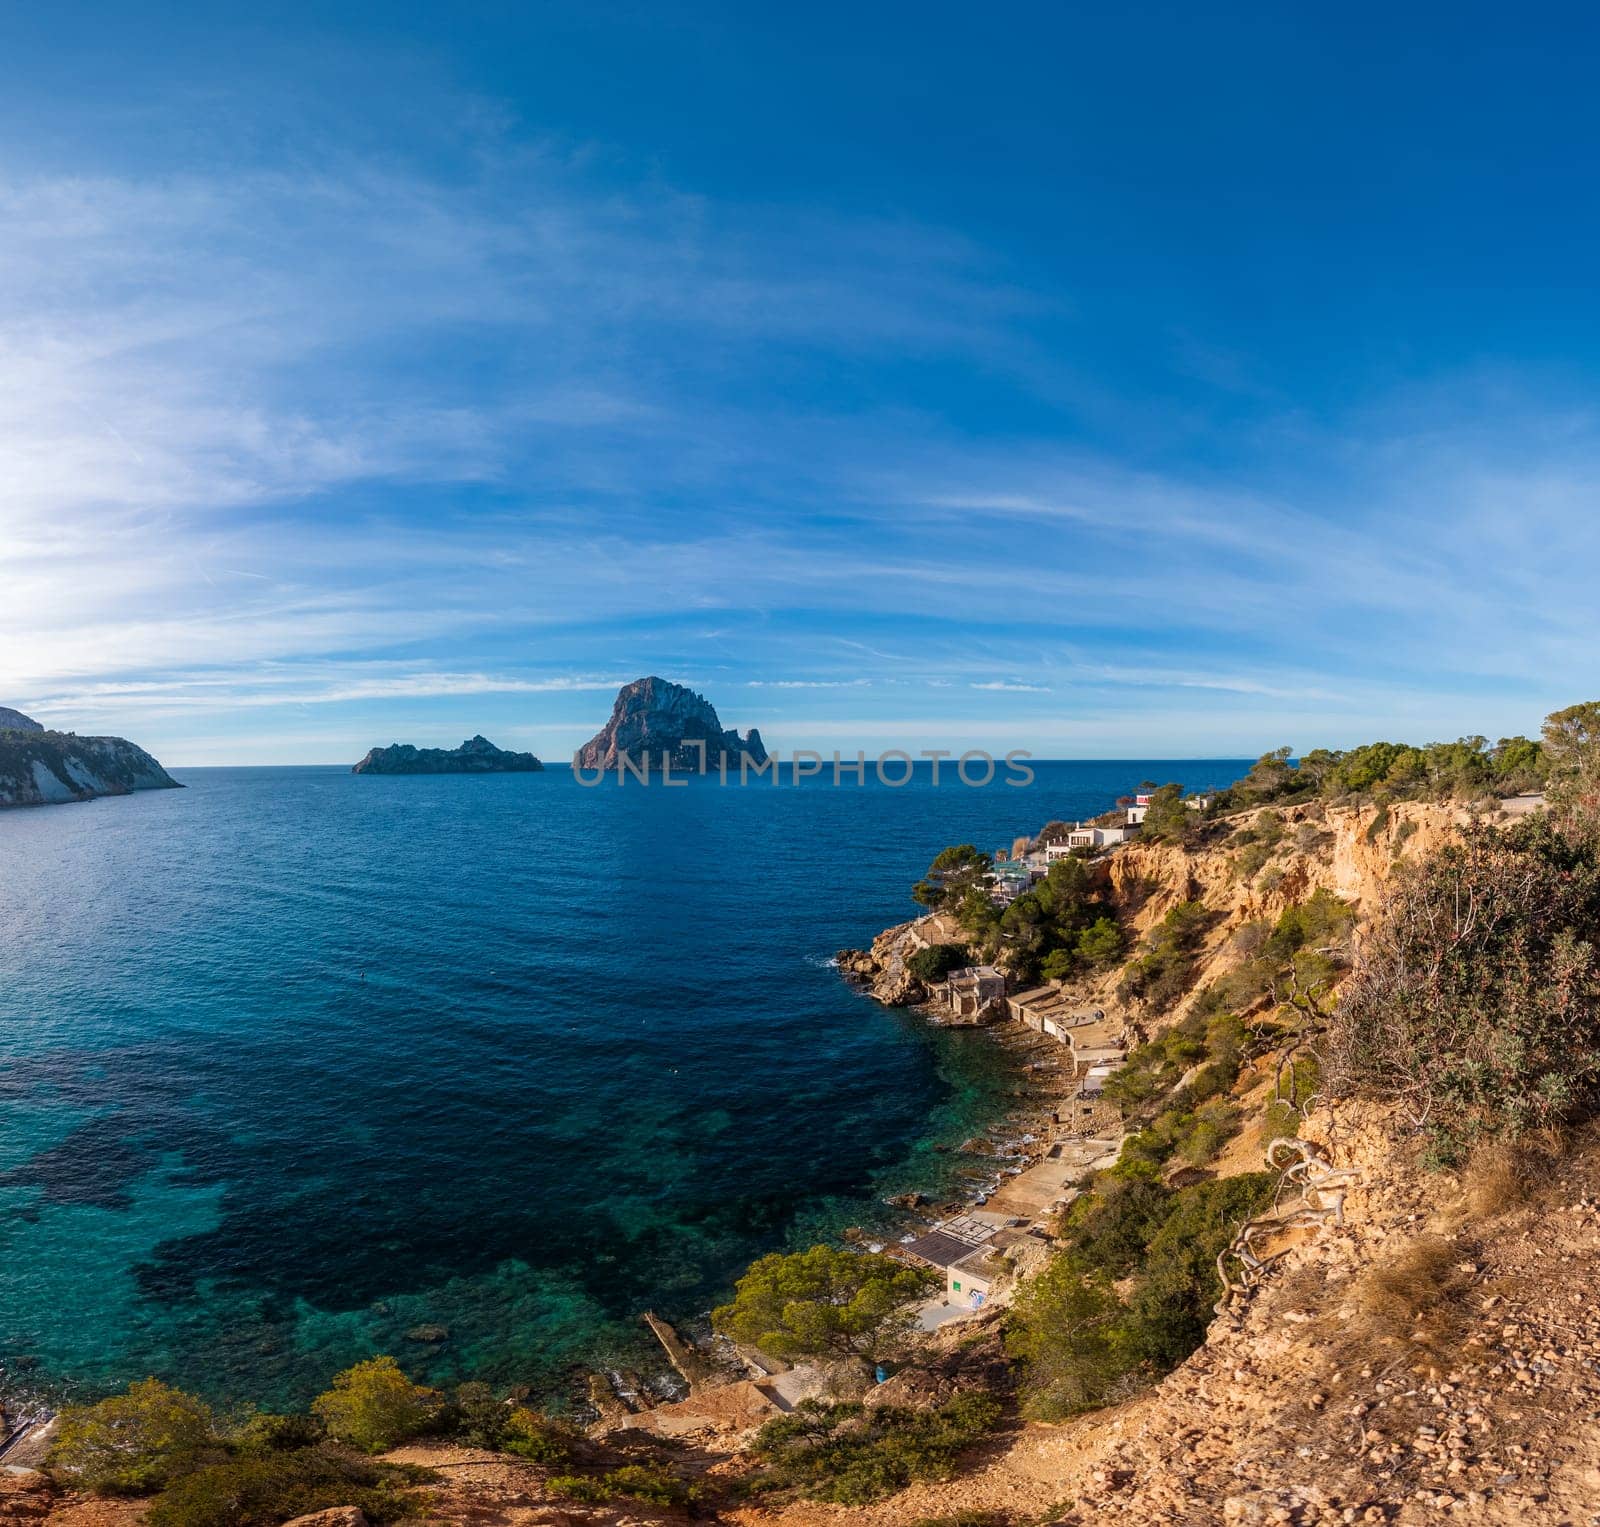 Picturesque coastal view with rocky formations and cliff-edge structures under a bright blue sky, Es Vedra in Ibiza